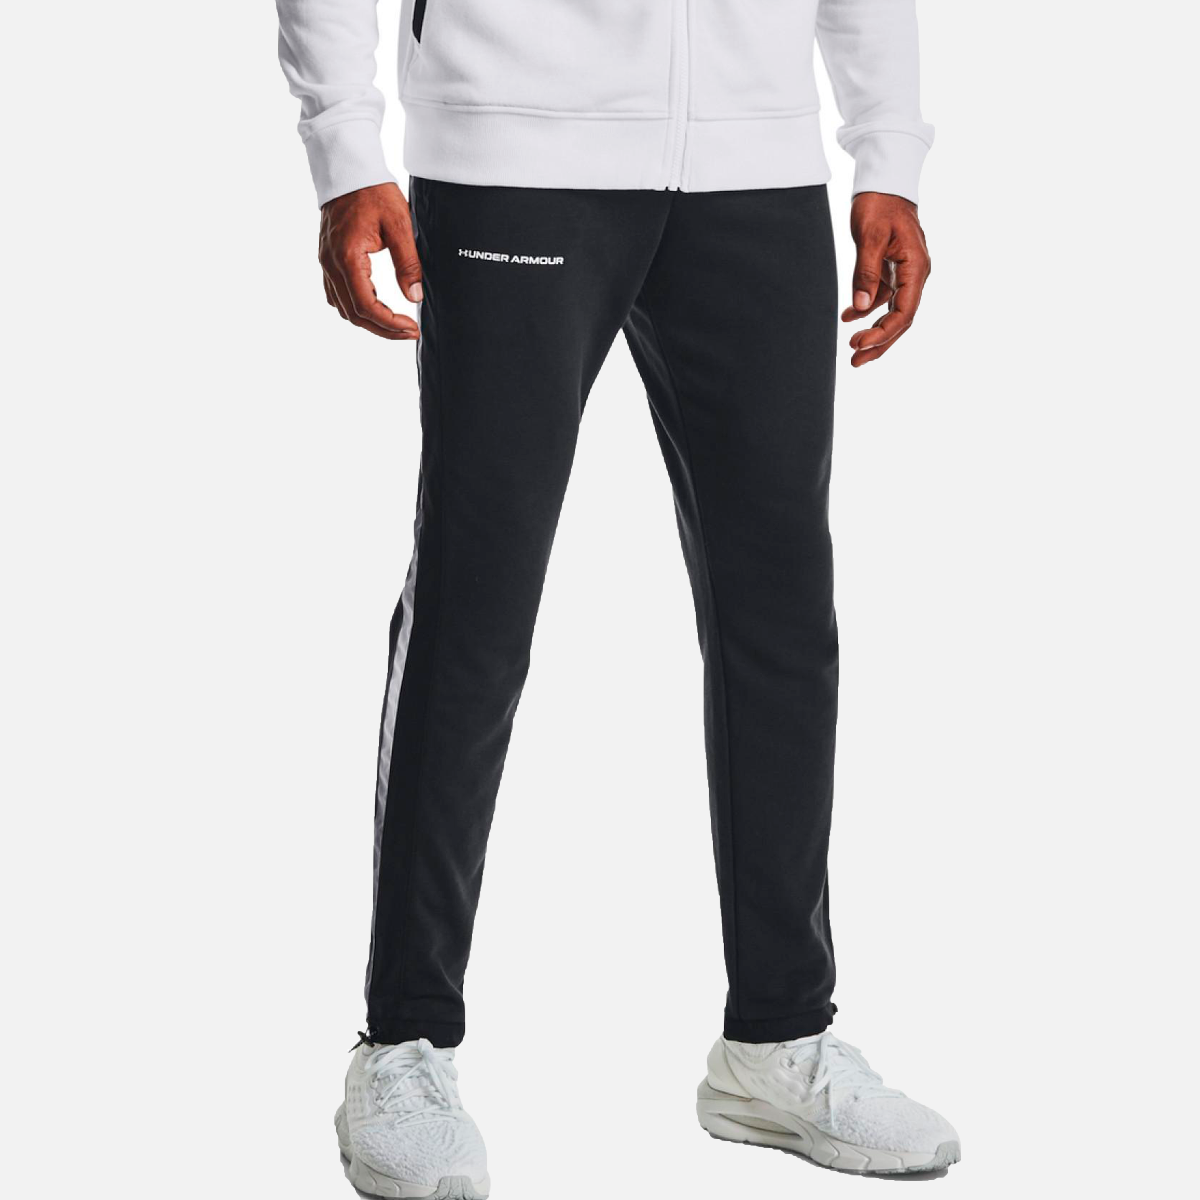 Under Armor Rival Terry Pants - Black